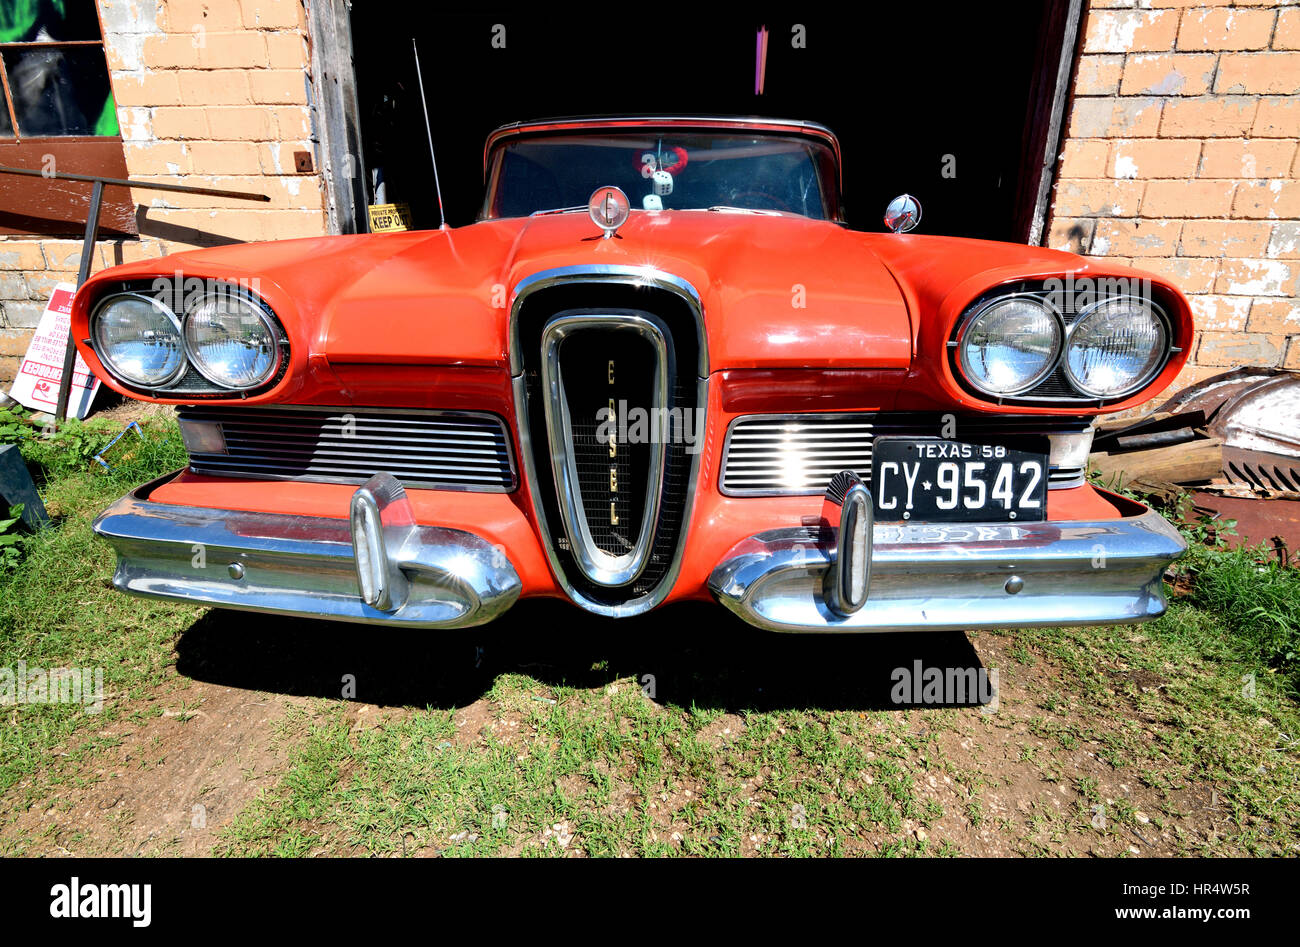 A 1958 or 1959 Ford Edsel Classic Car Stock Photo